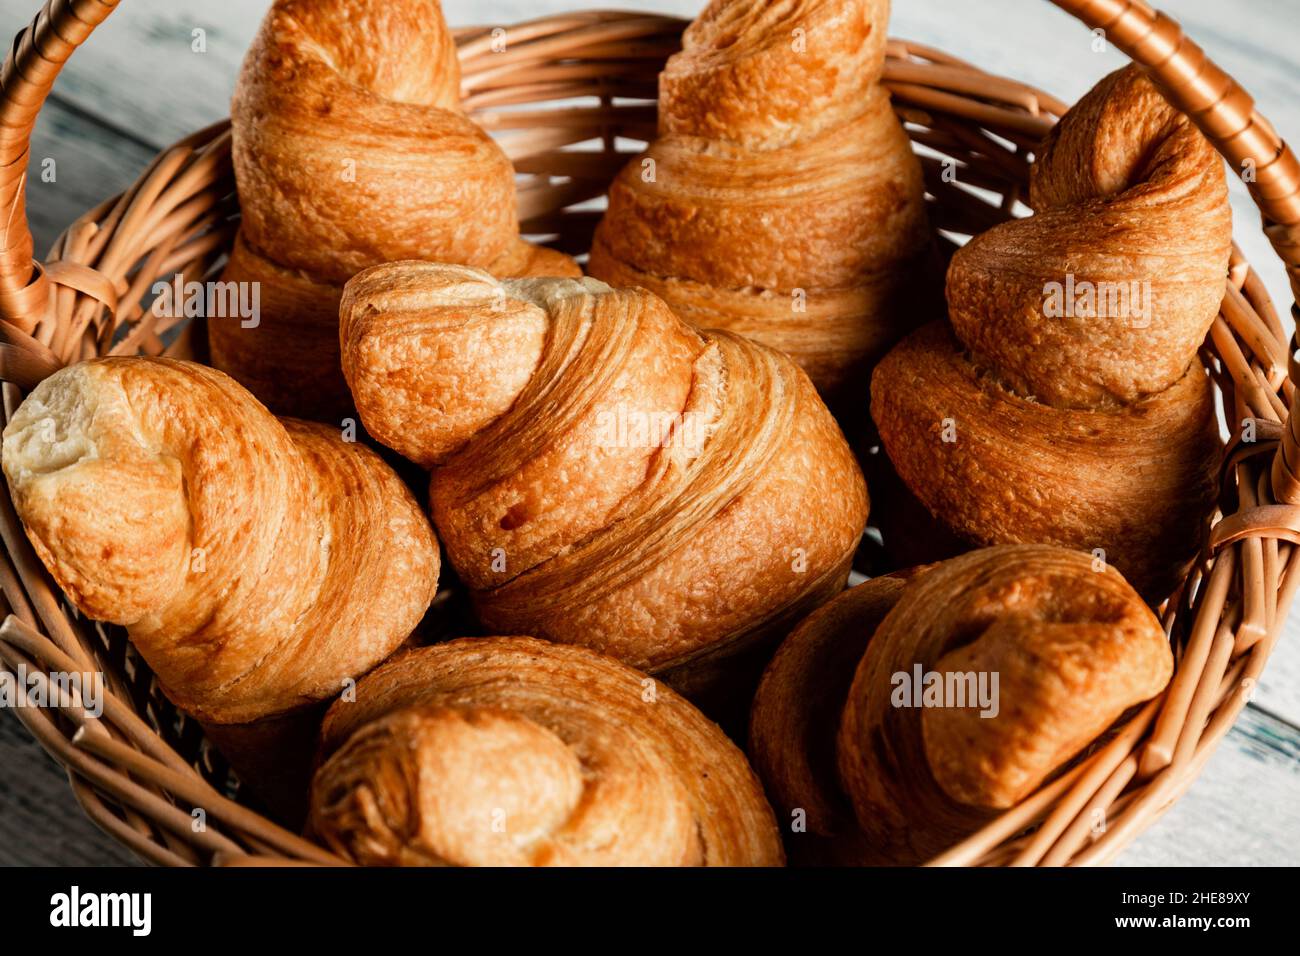 Croissants in a wicker basket on a wooden background. Closeup. Stock Photo